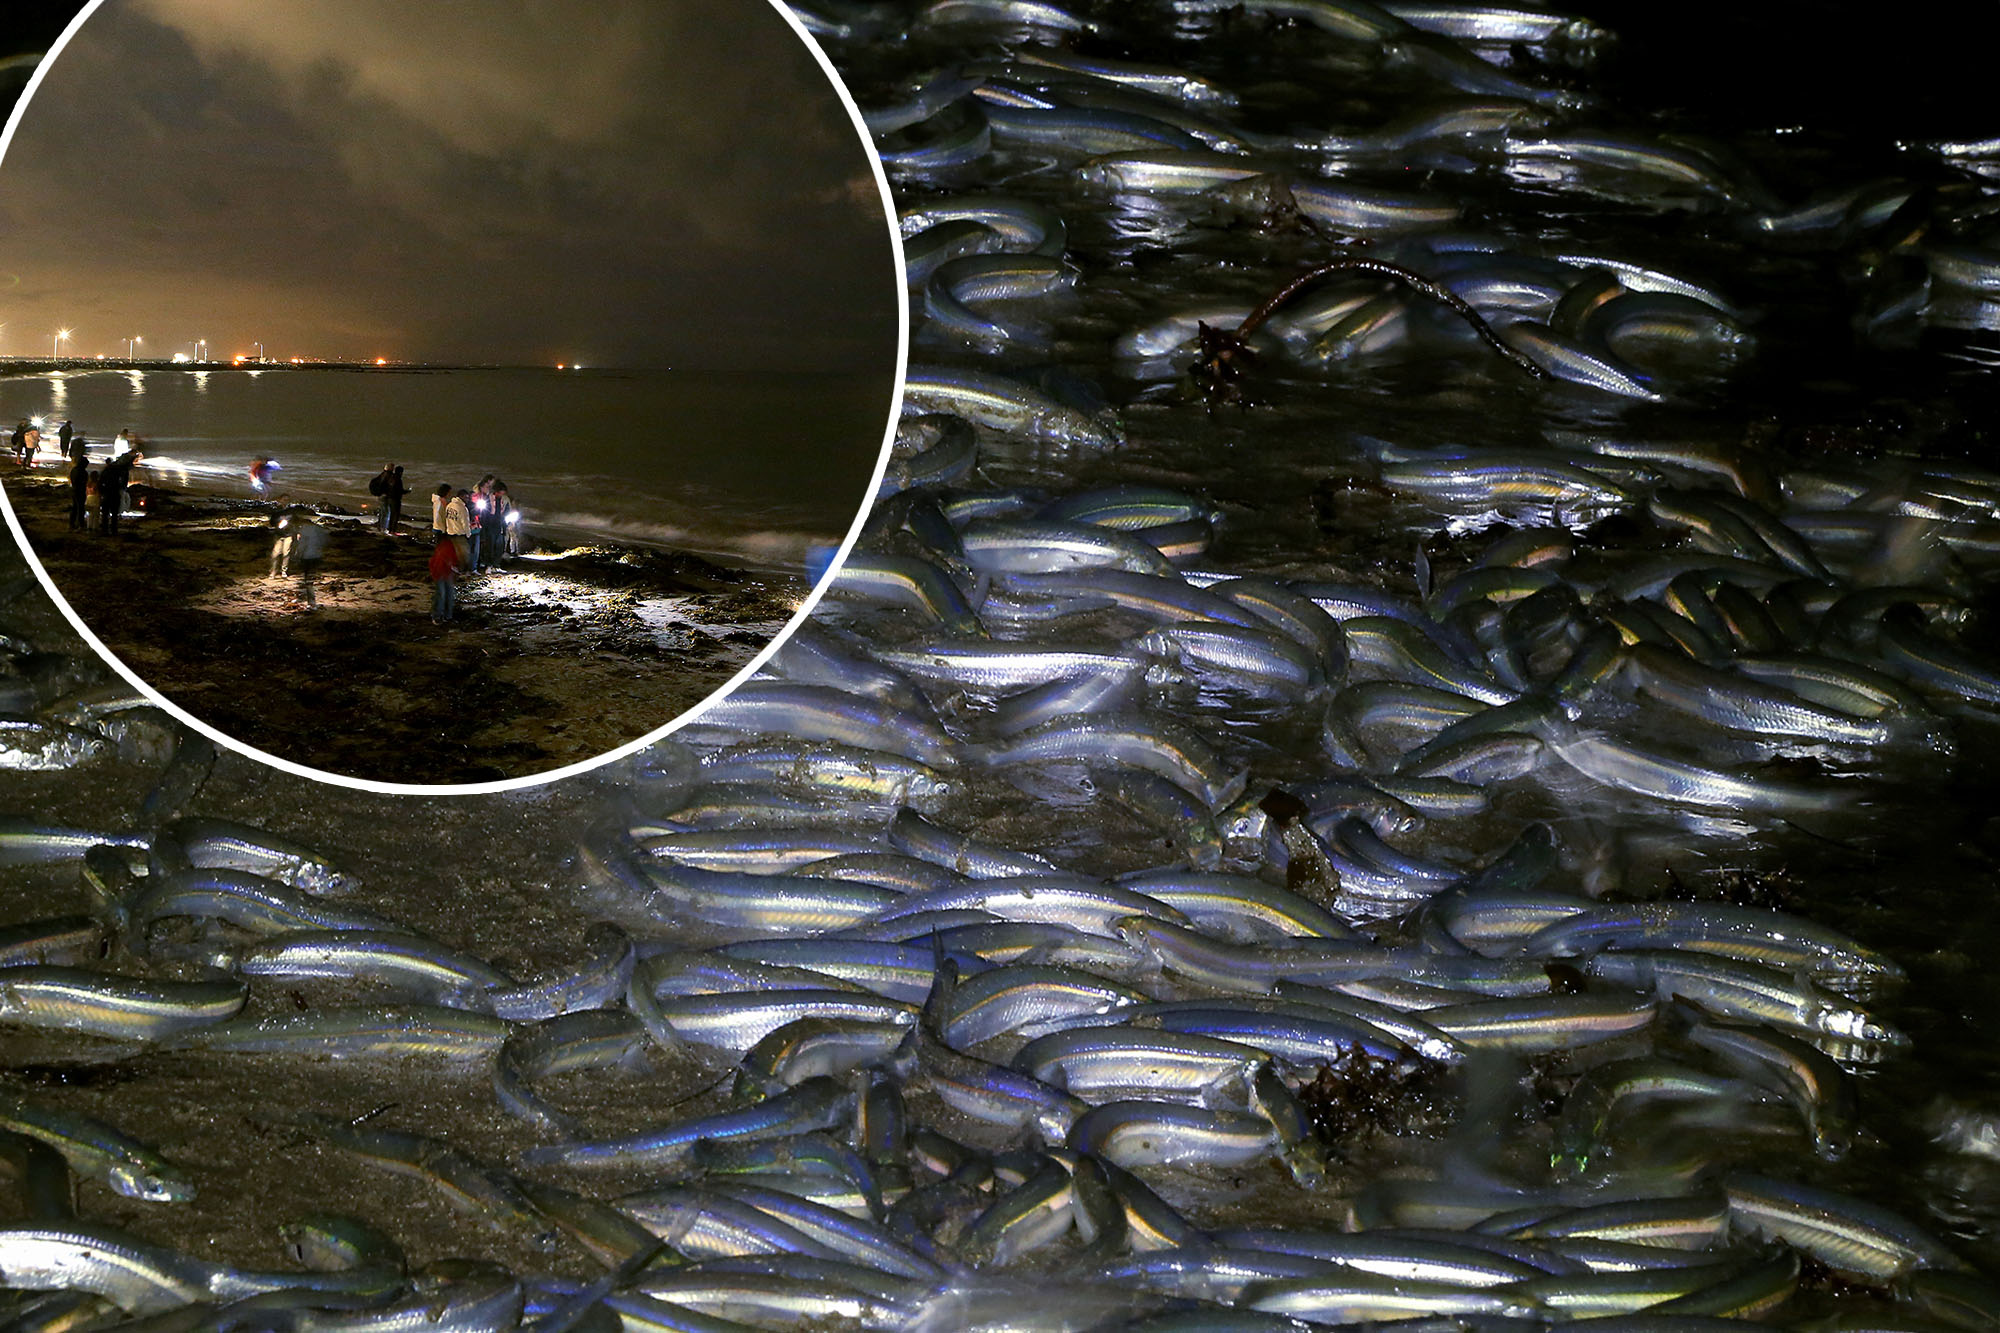 Like sex-crazed Swallows returning to Capistrano, millions of fish have called grunions descended upon California beaches to throw their annual orgy under the full moon.